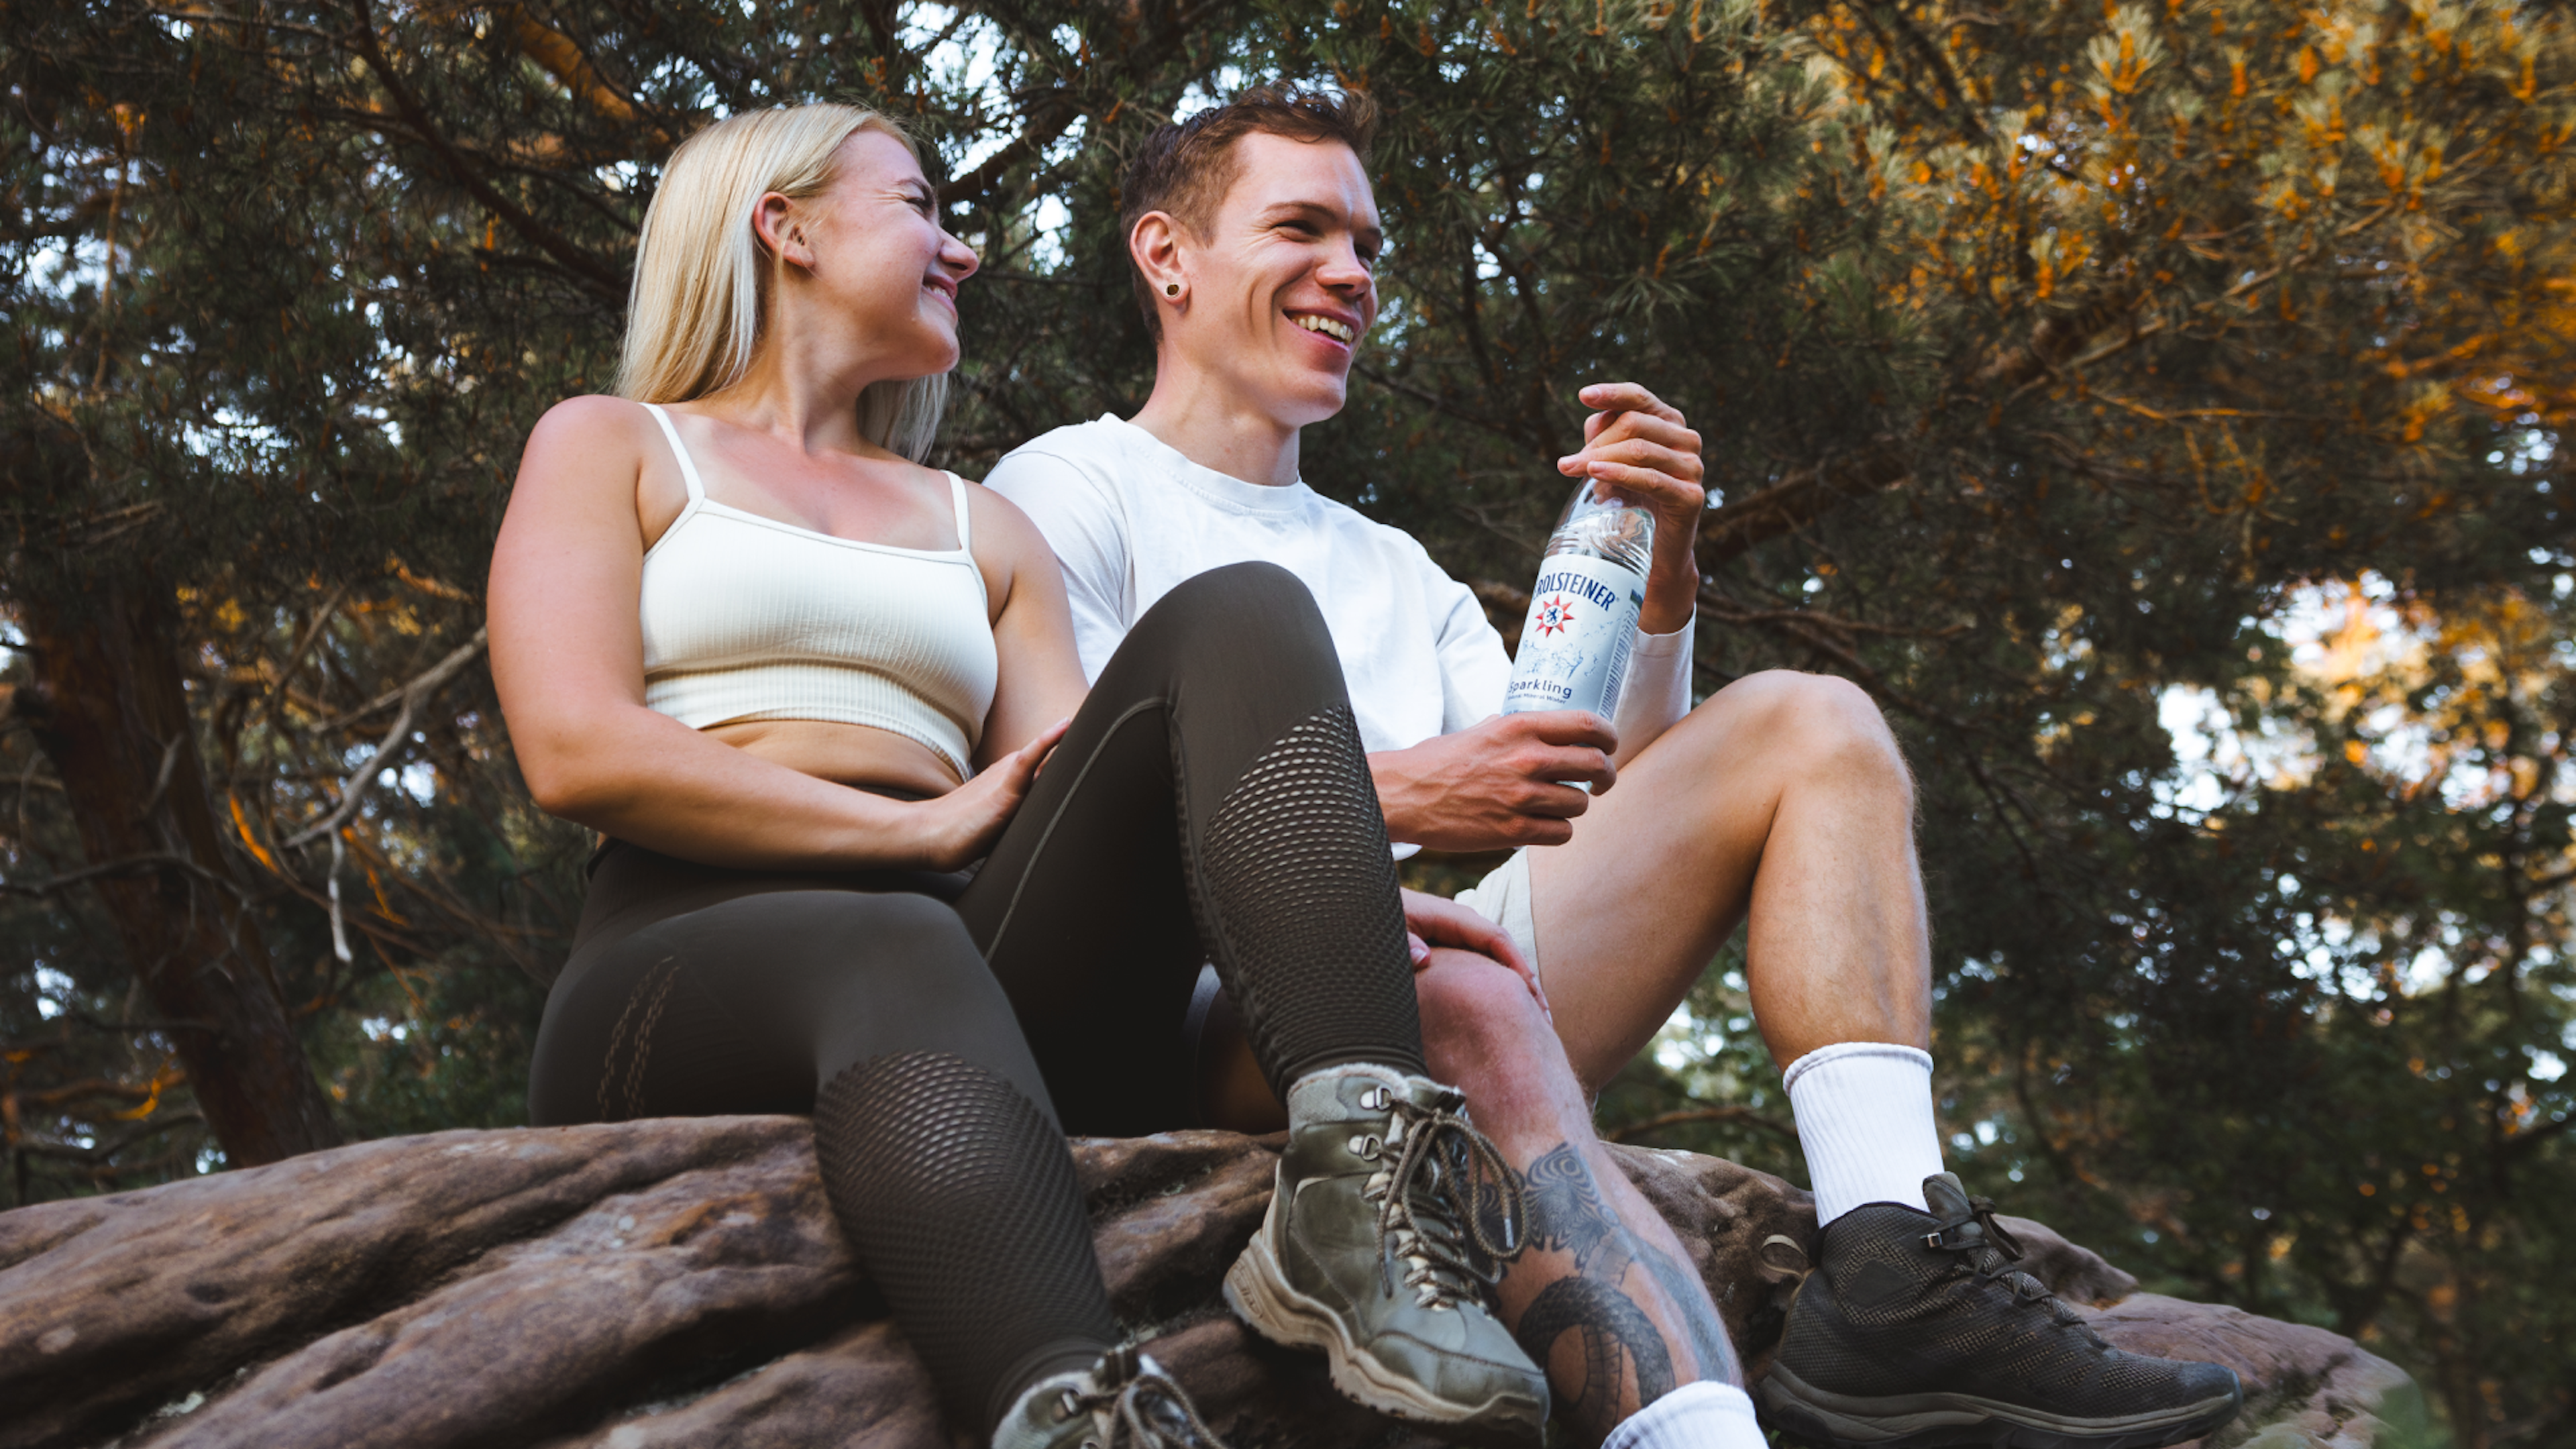 Two people are sitting on a tree trunk in the forest, smiling and holding a bottle of sparkling water.